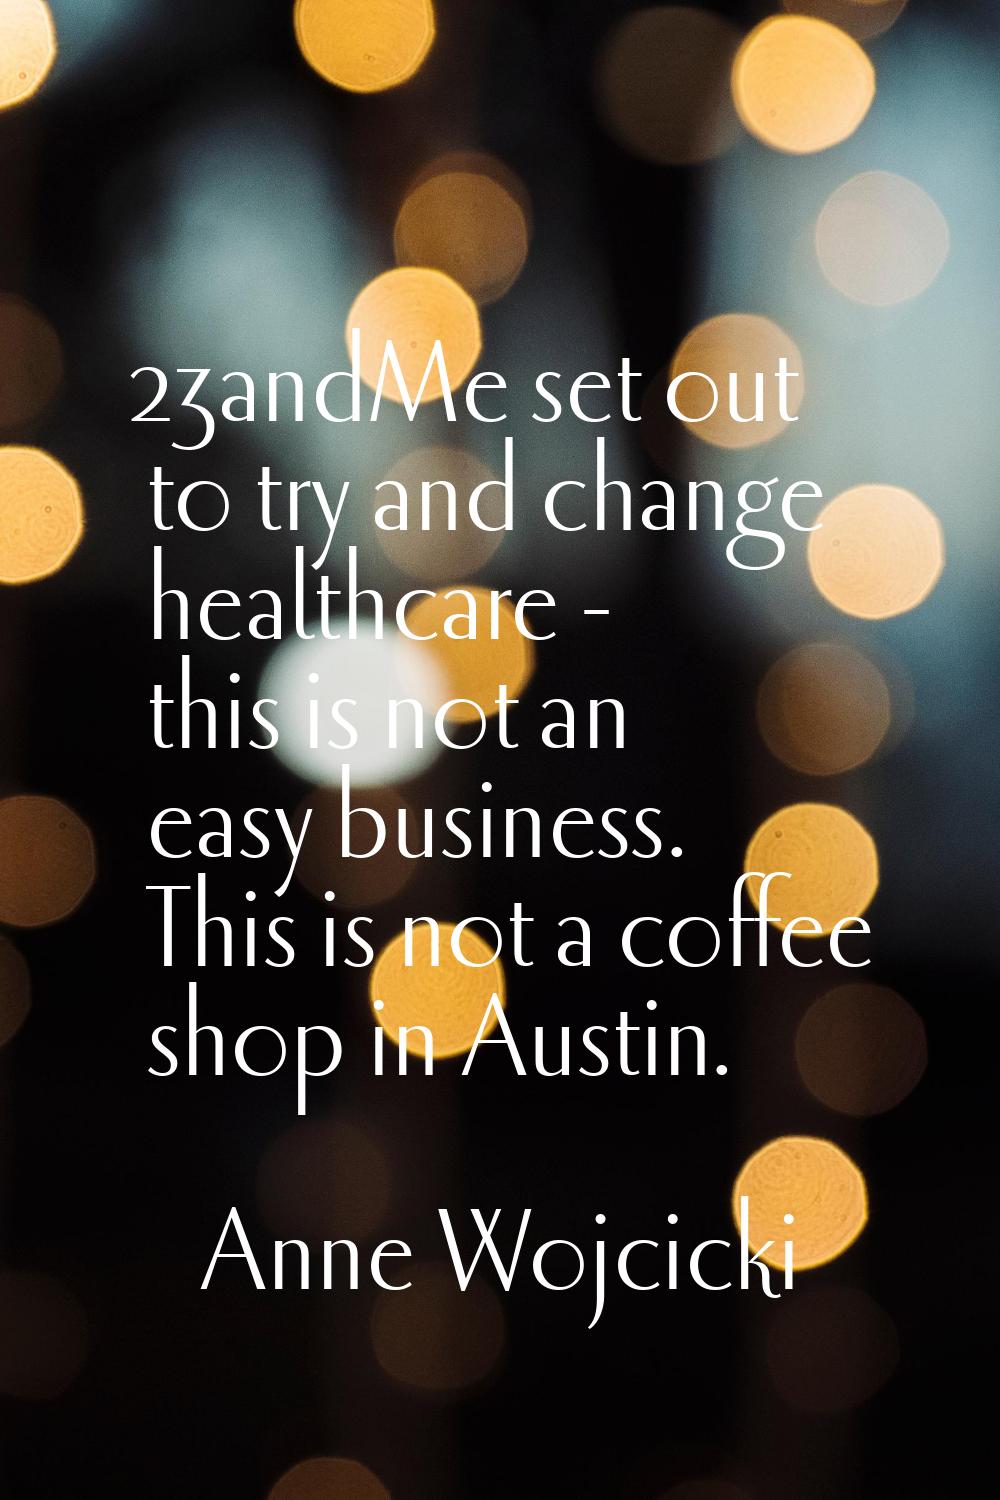 23andMe set out to try and change healthcare - this is not an easy business. This is not a coffee s